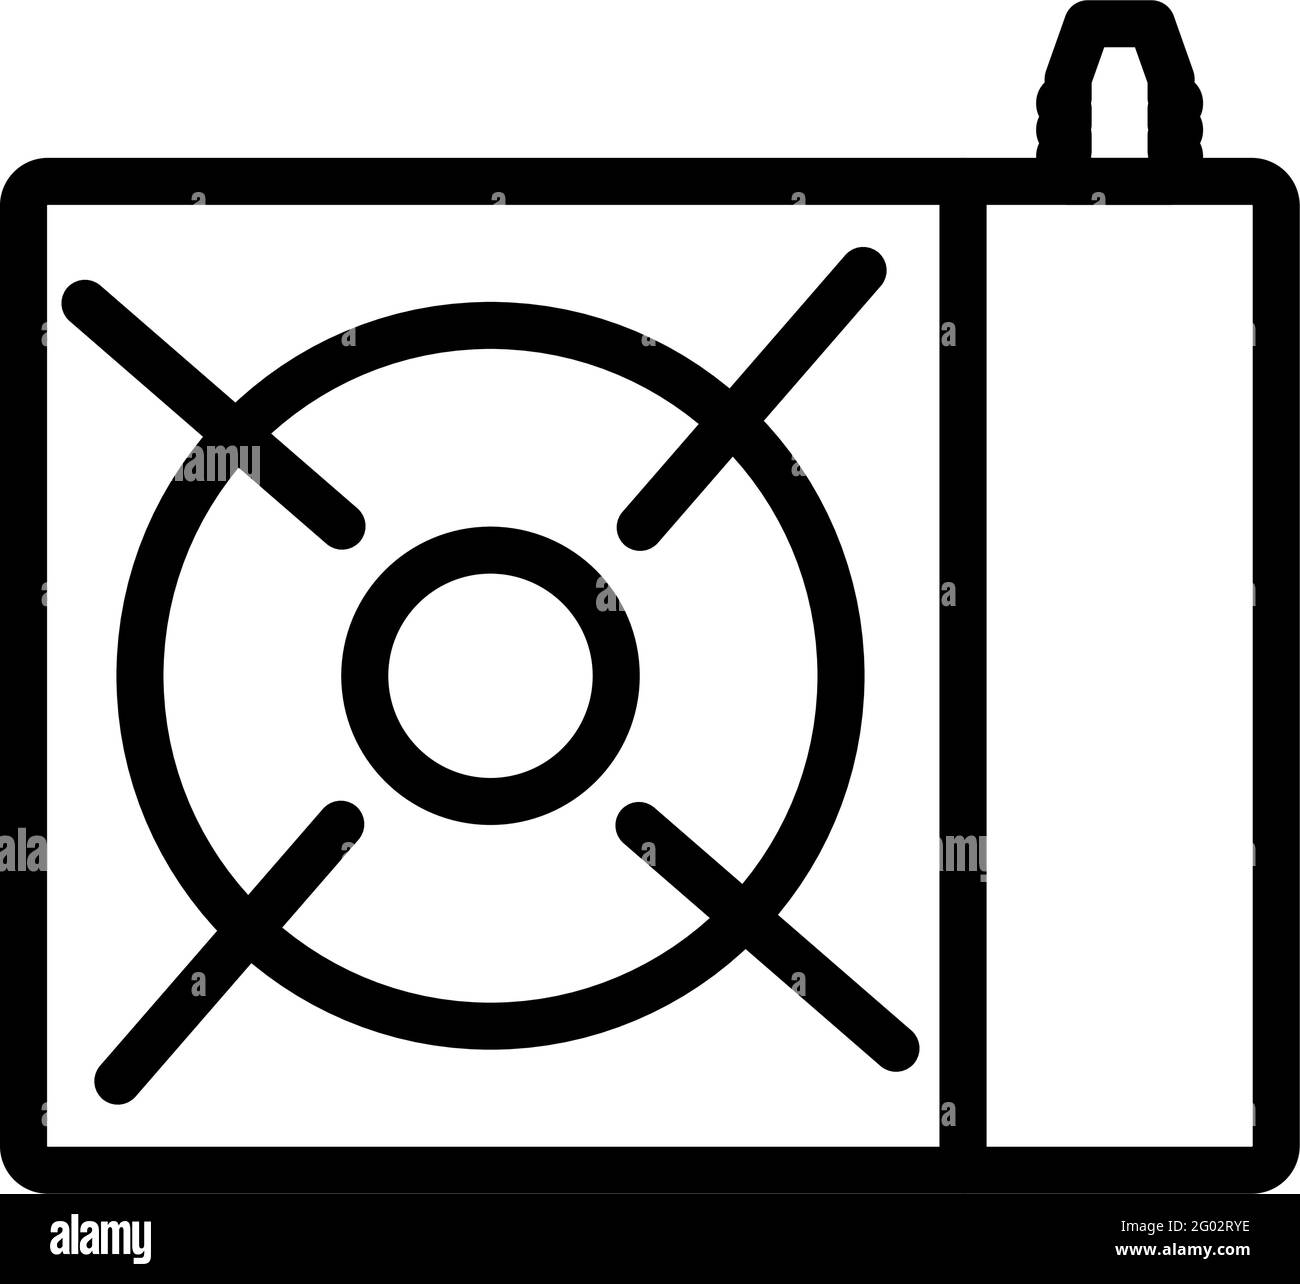 Icon Of Camping Gas Burner Stove. Editable Bold Outline Design. Vector Illustration. Stock Vector